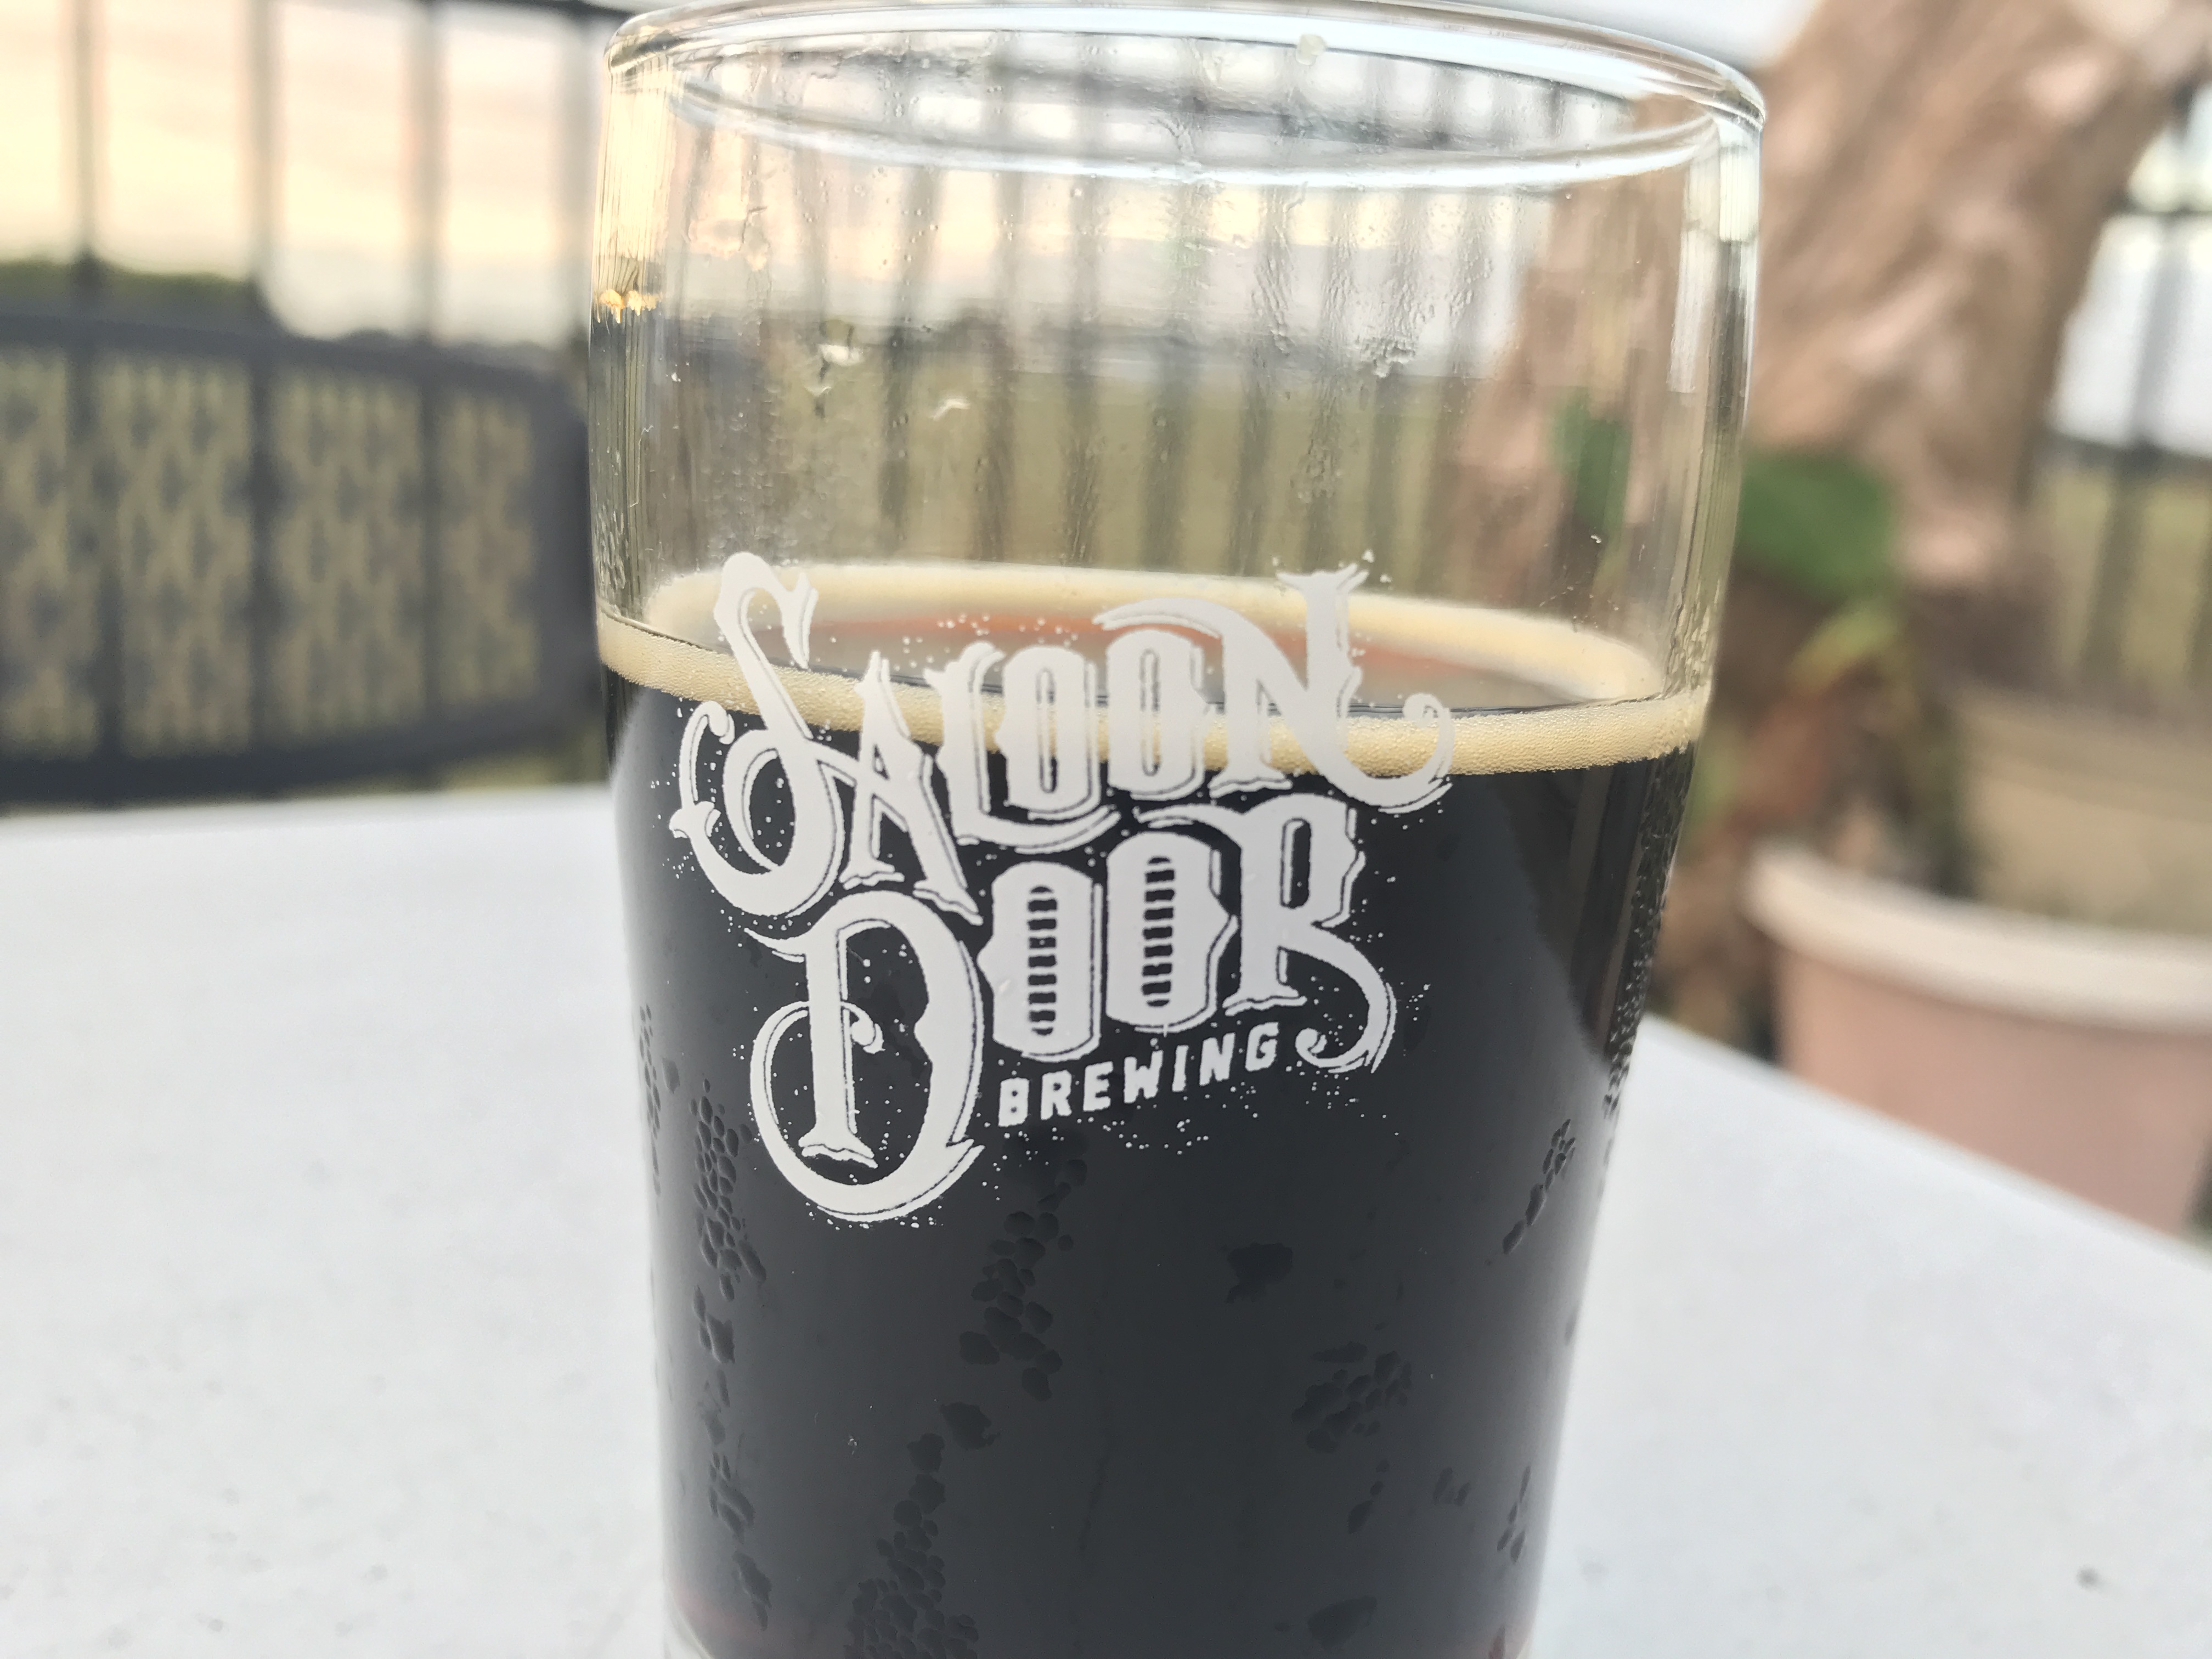 PHOTO: The "Tasty AF" Peanut Butter and Chocolate taster beer from the flight sampler offered at Saloon Door Brewing. Photo by the Signal Reporter, Alex Petty.